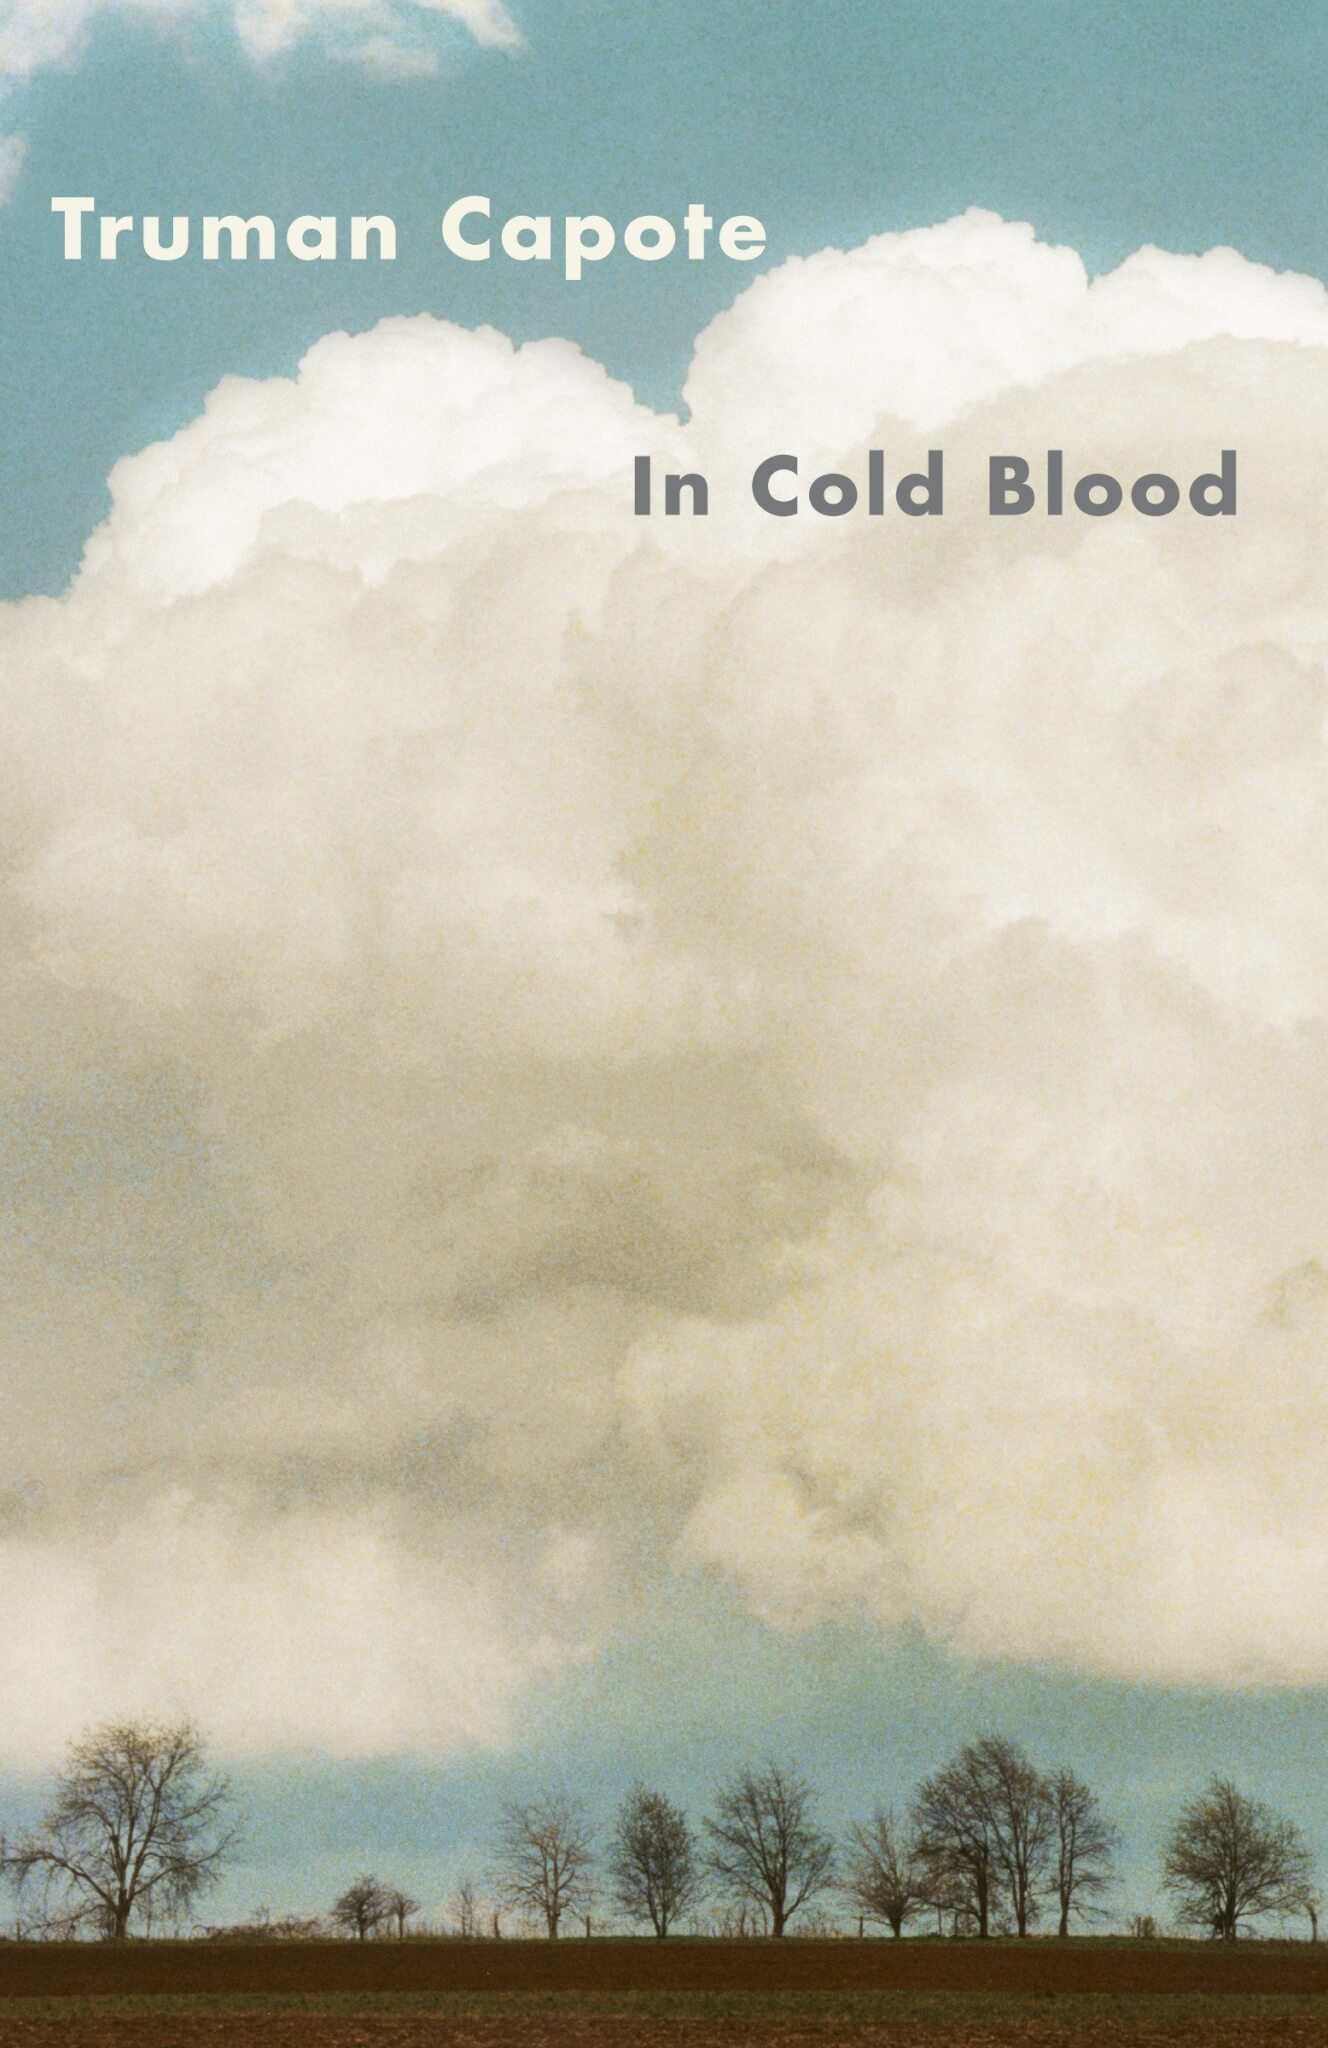 "In Cold Blood" by Truman Capote